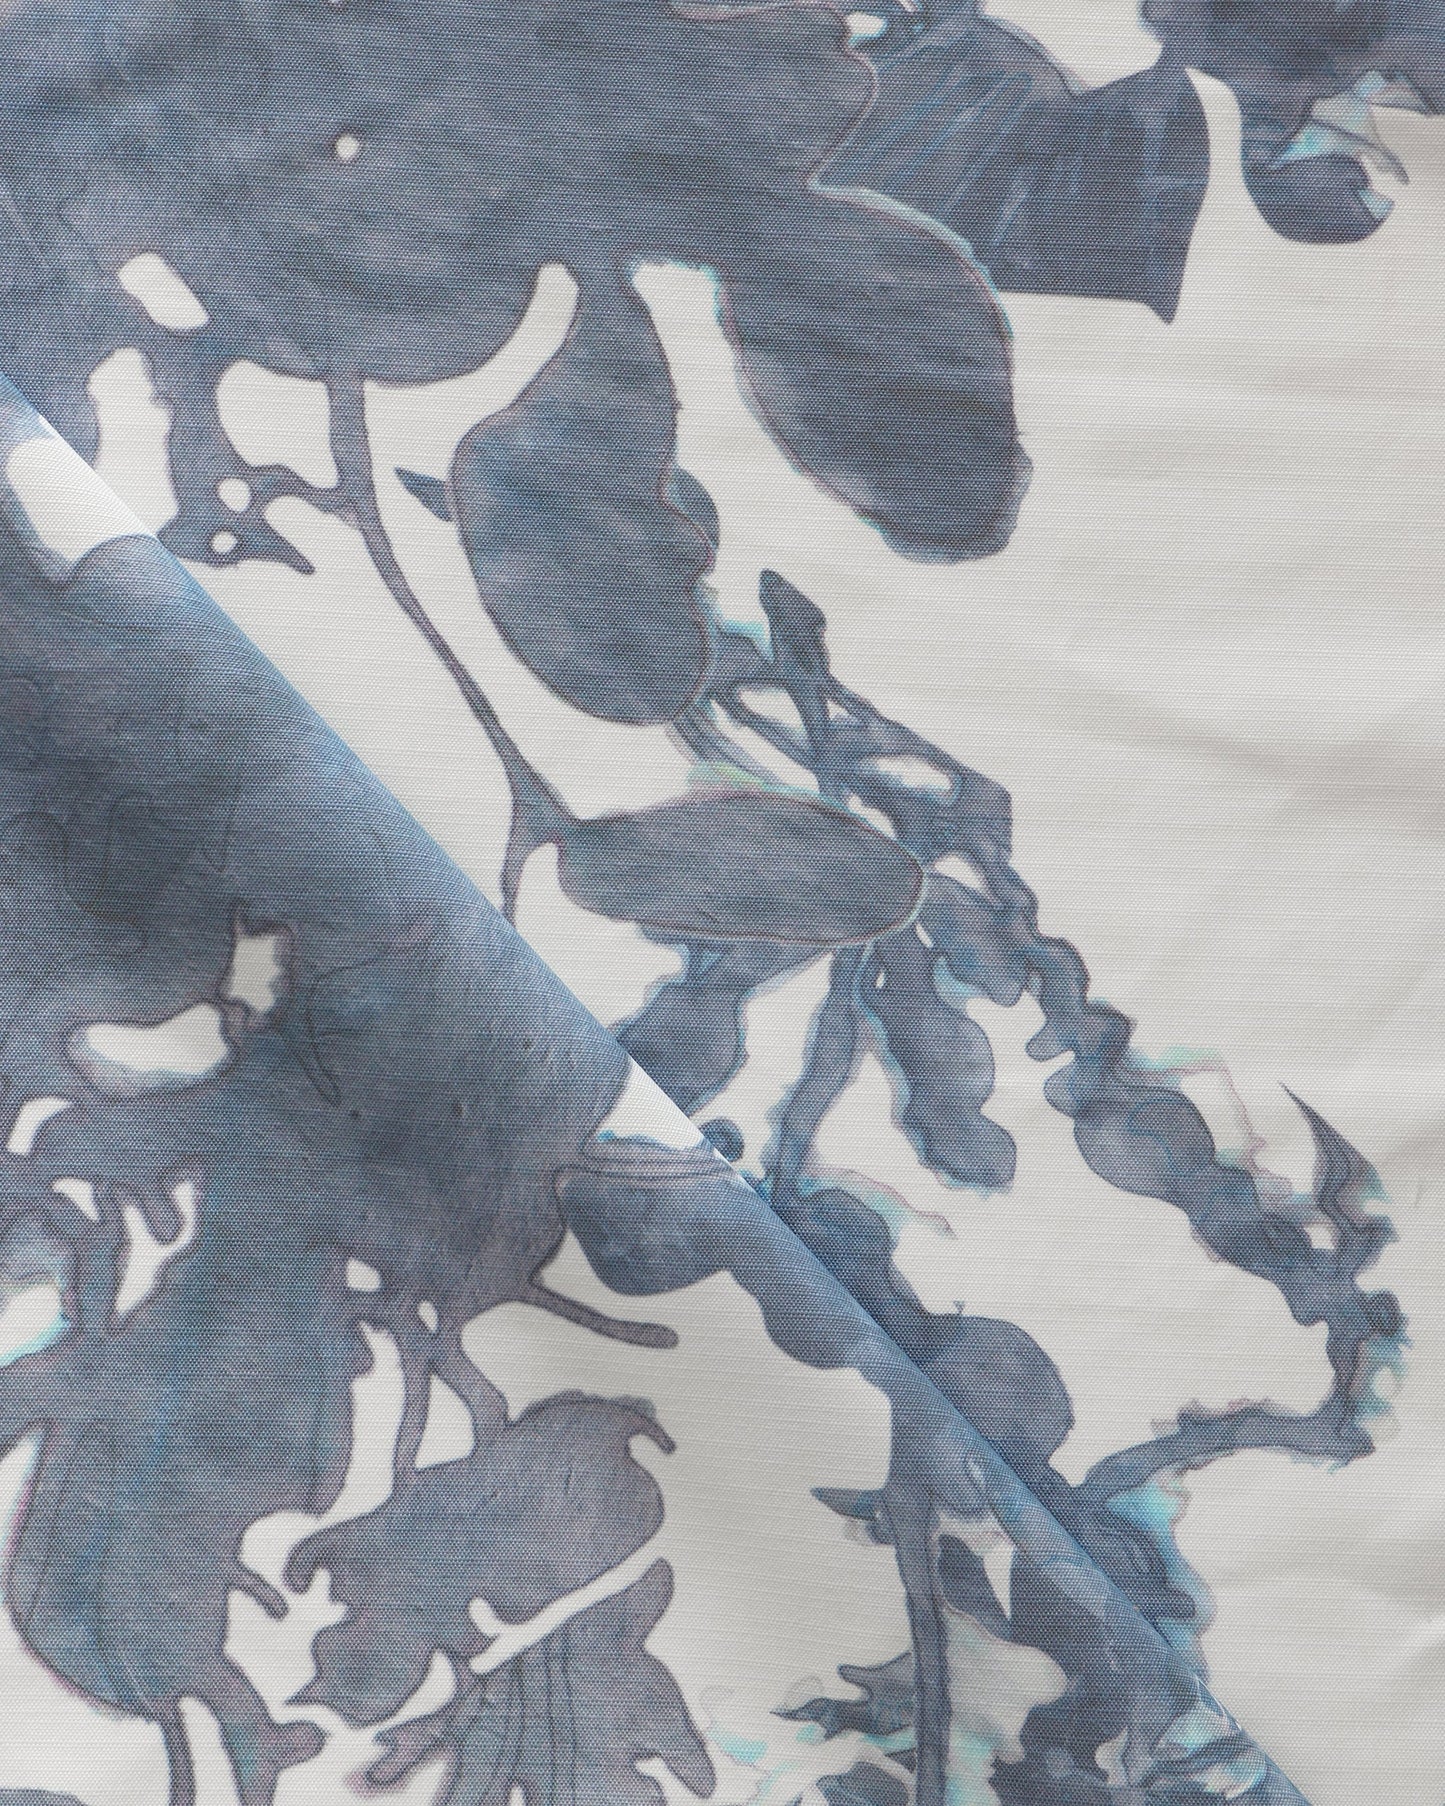 A close up of the Up for Anything Performance Fabric||Cerulean, a luxury performance fabric with a blue and white abstract botanical pattern suitable for high-traffic applications.